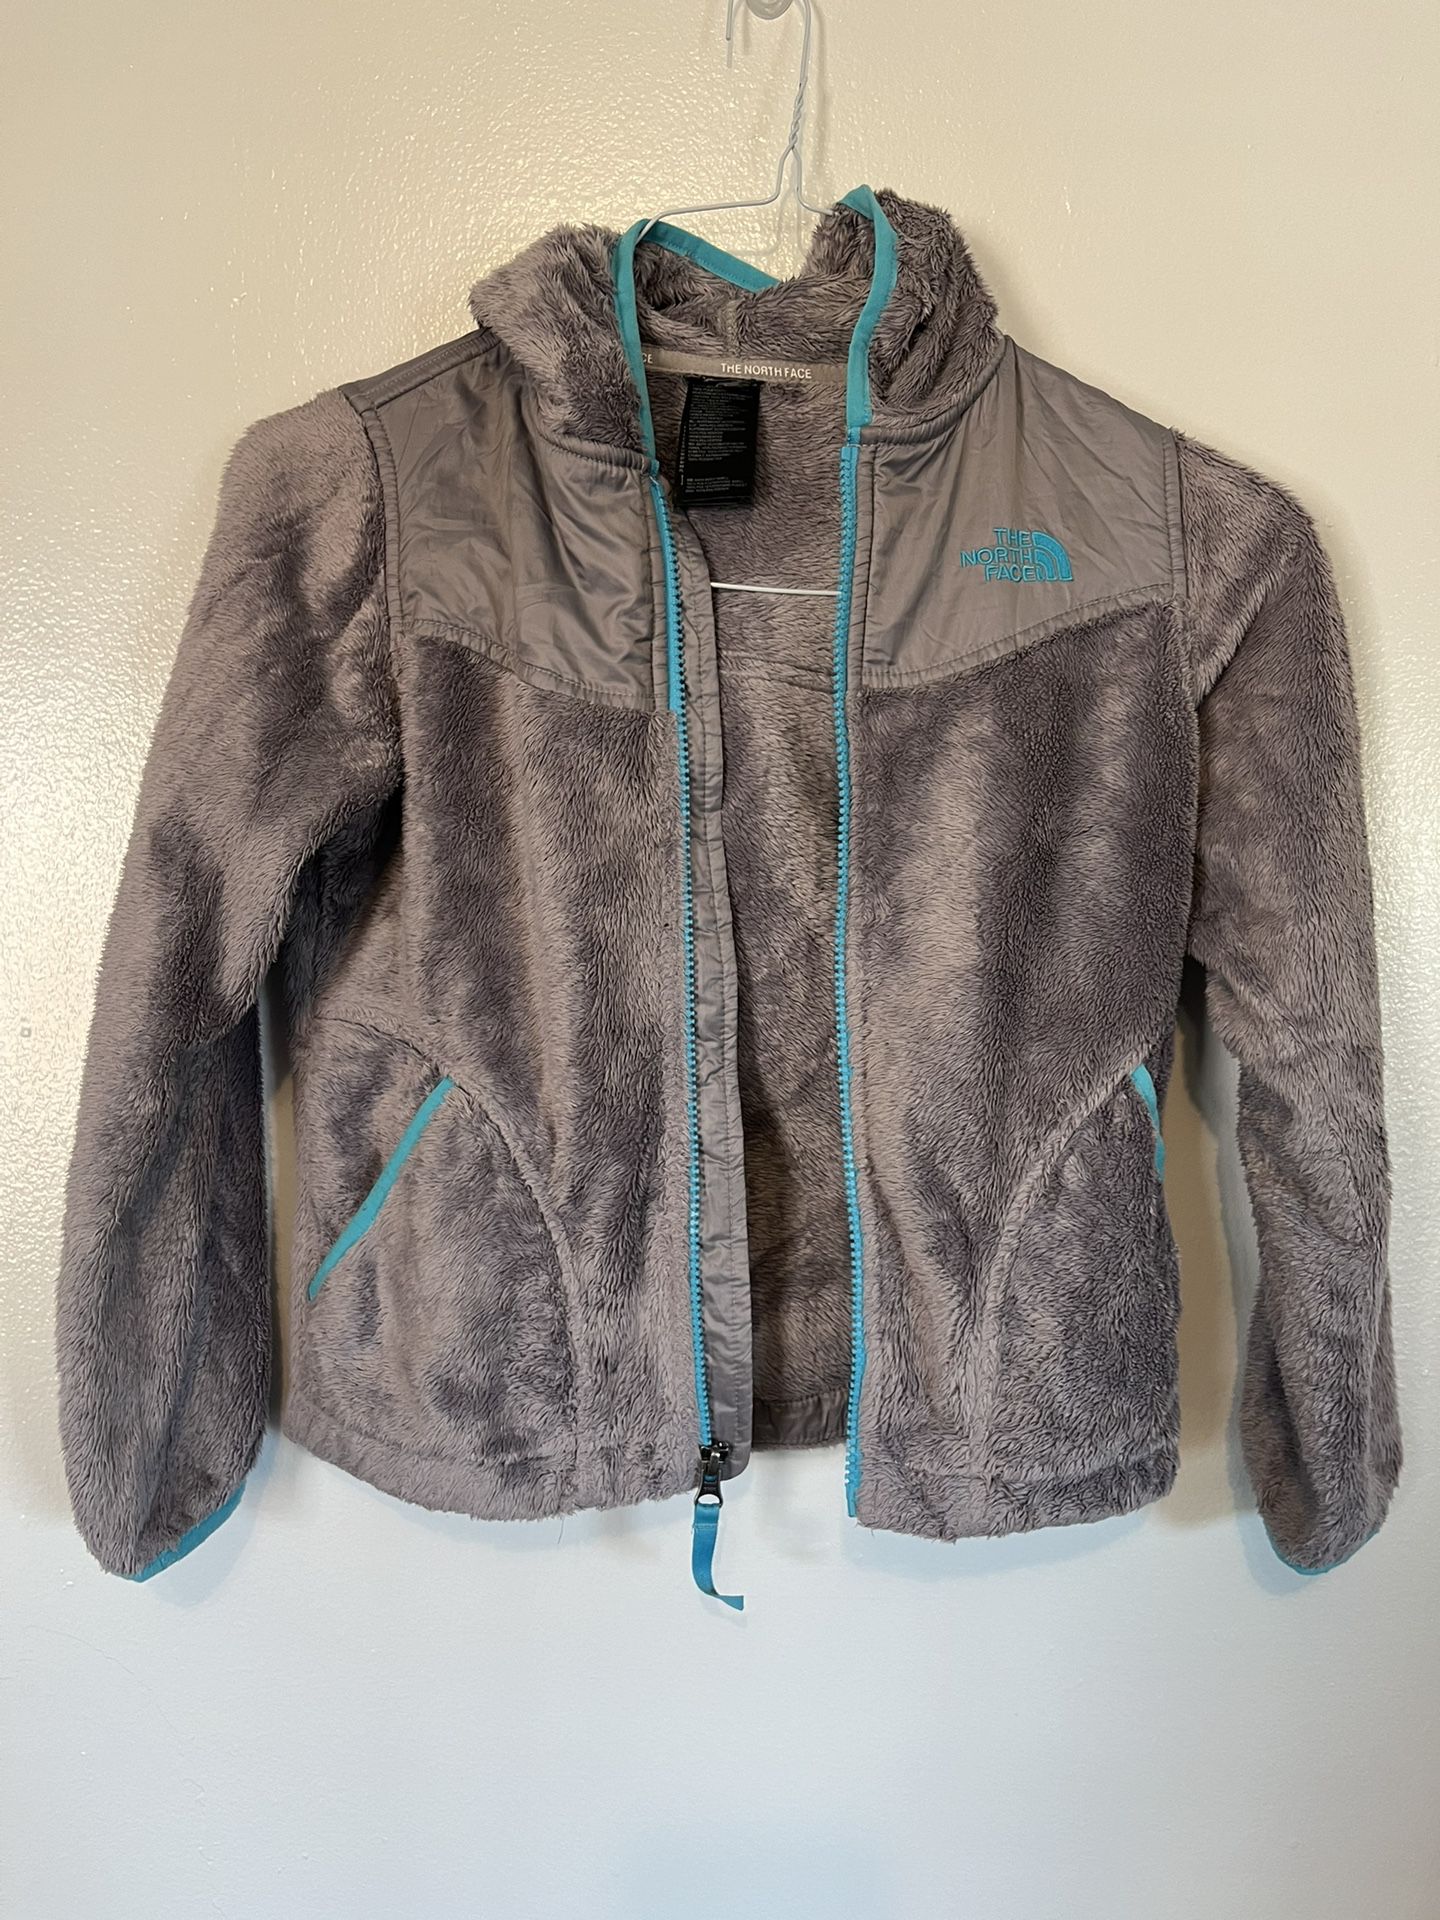 North face girl's jacket Size SP  (7/8)